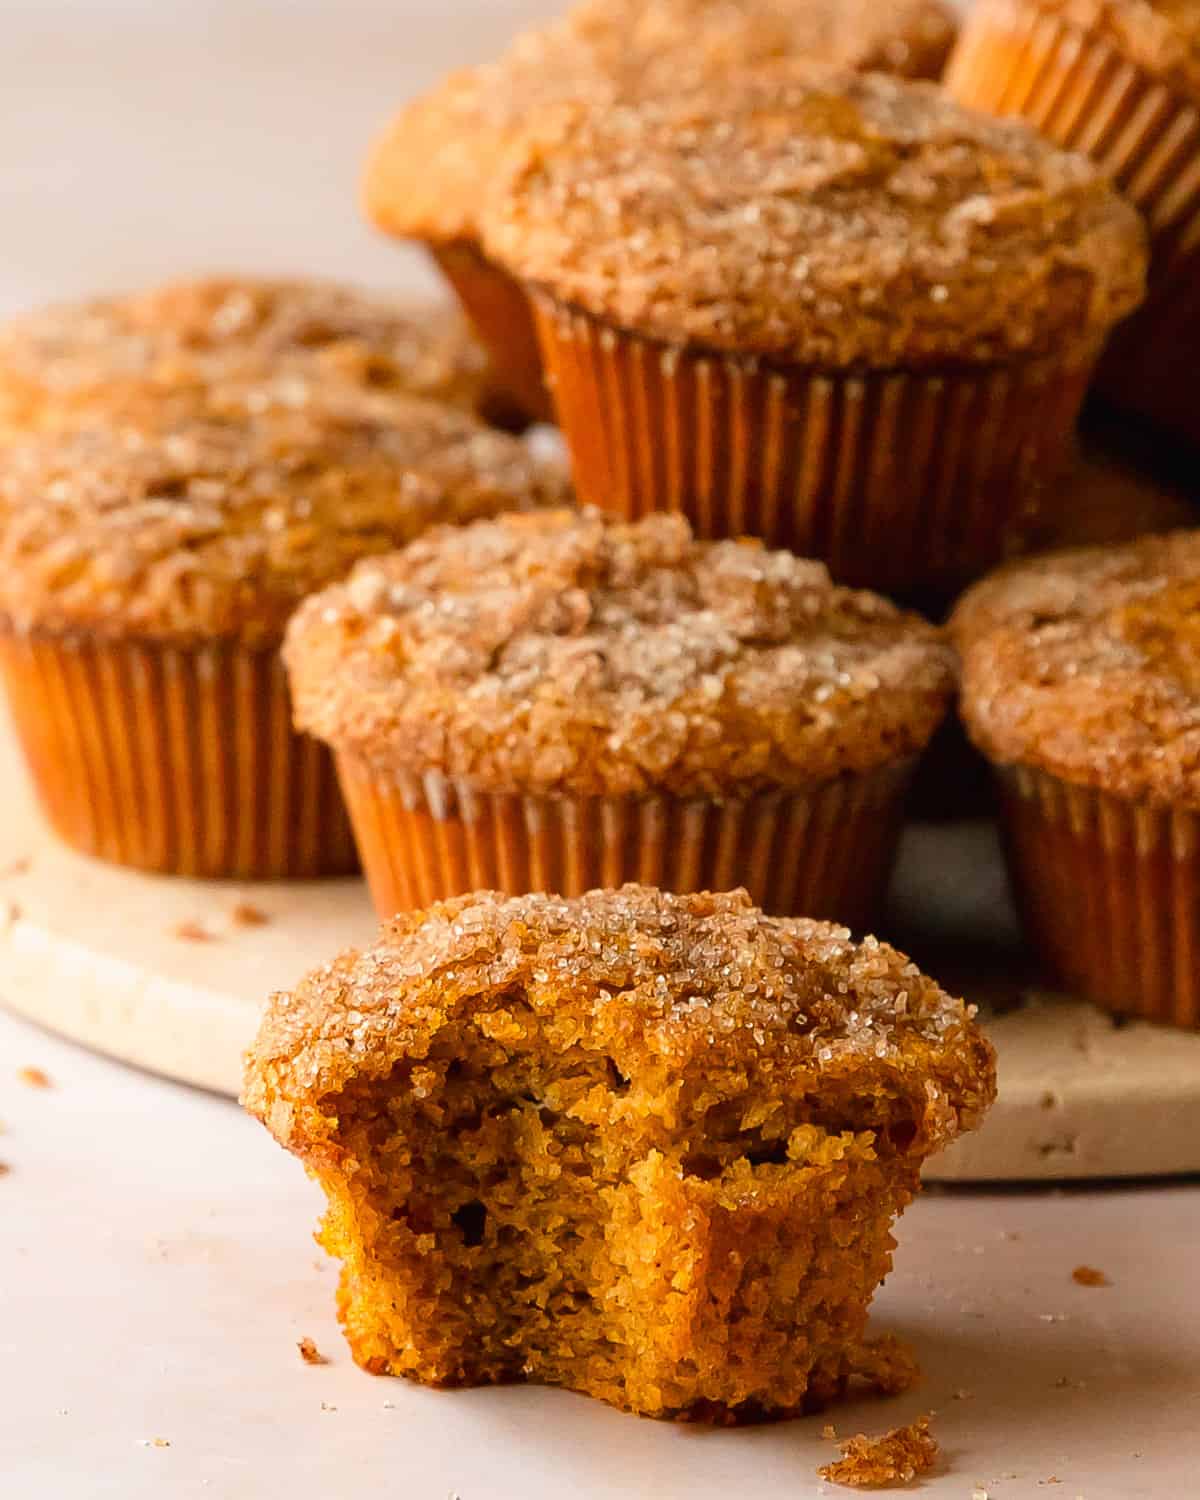 Pumpkin banana muffins are a deliciously soft, moist and fluffy cross between pumpkin bread and banana bread. These banana pumpkin muffins are topped with crunchy cinnamon sugar, giving them the perfect contrast of texture and flavors.  They make the perfect fall breakfast treat. 